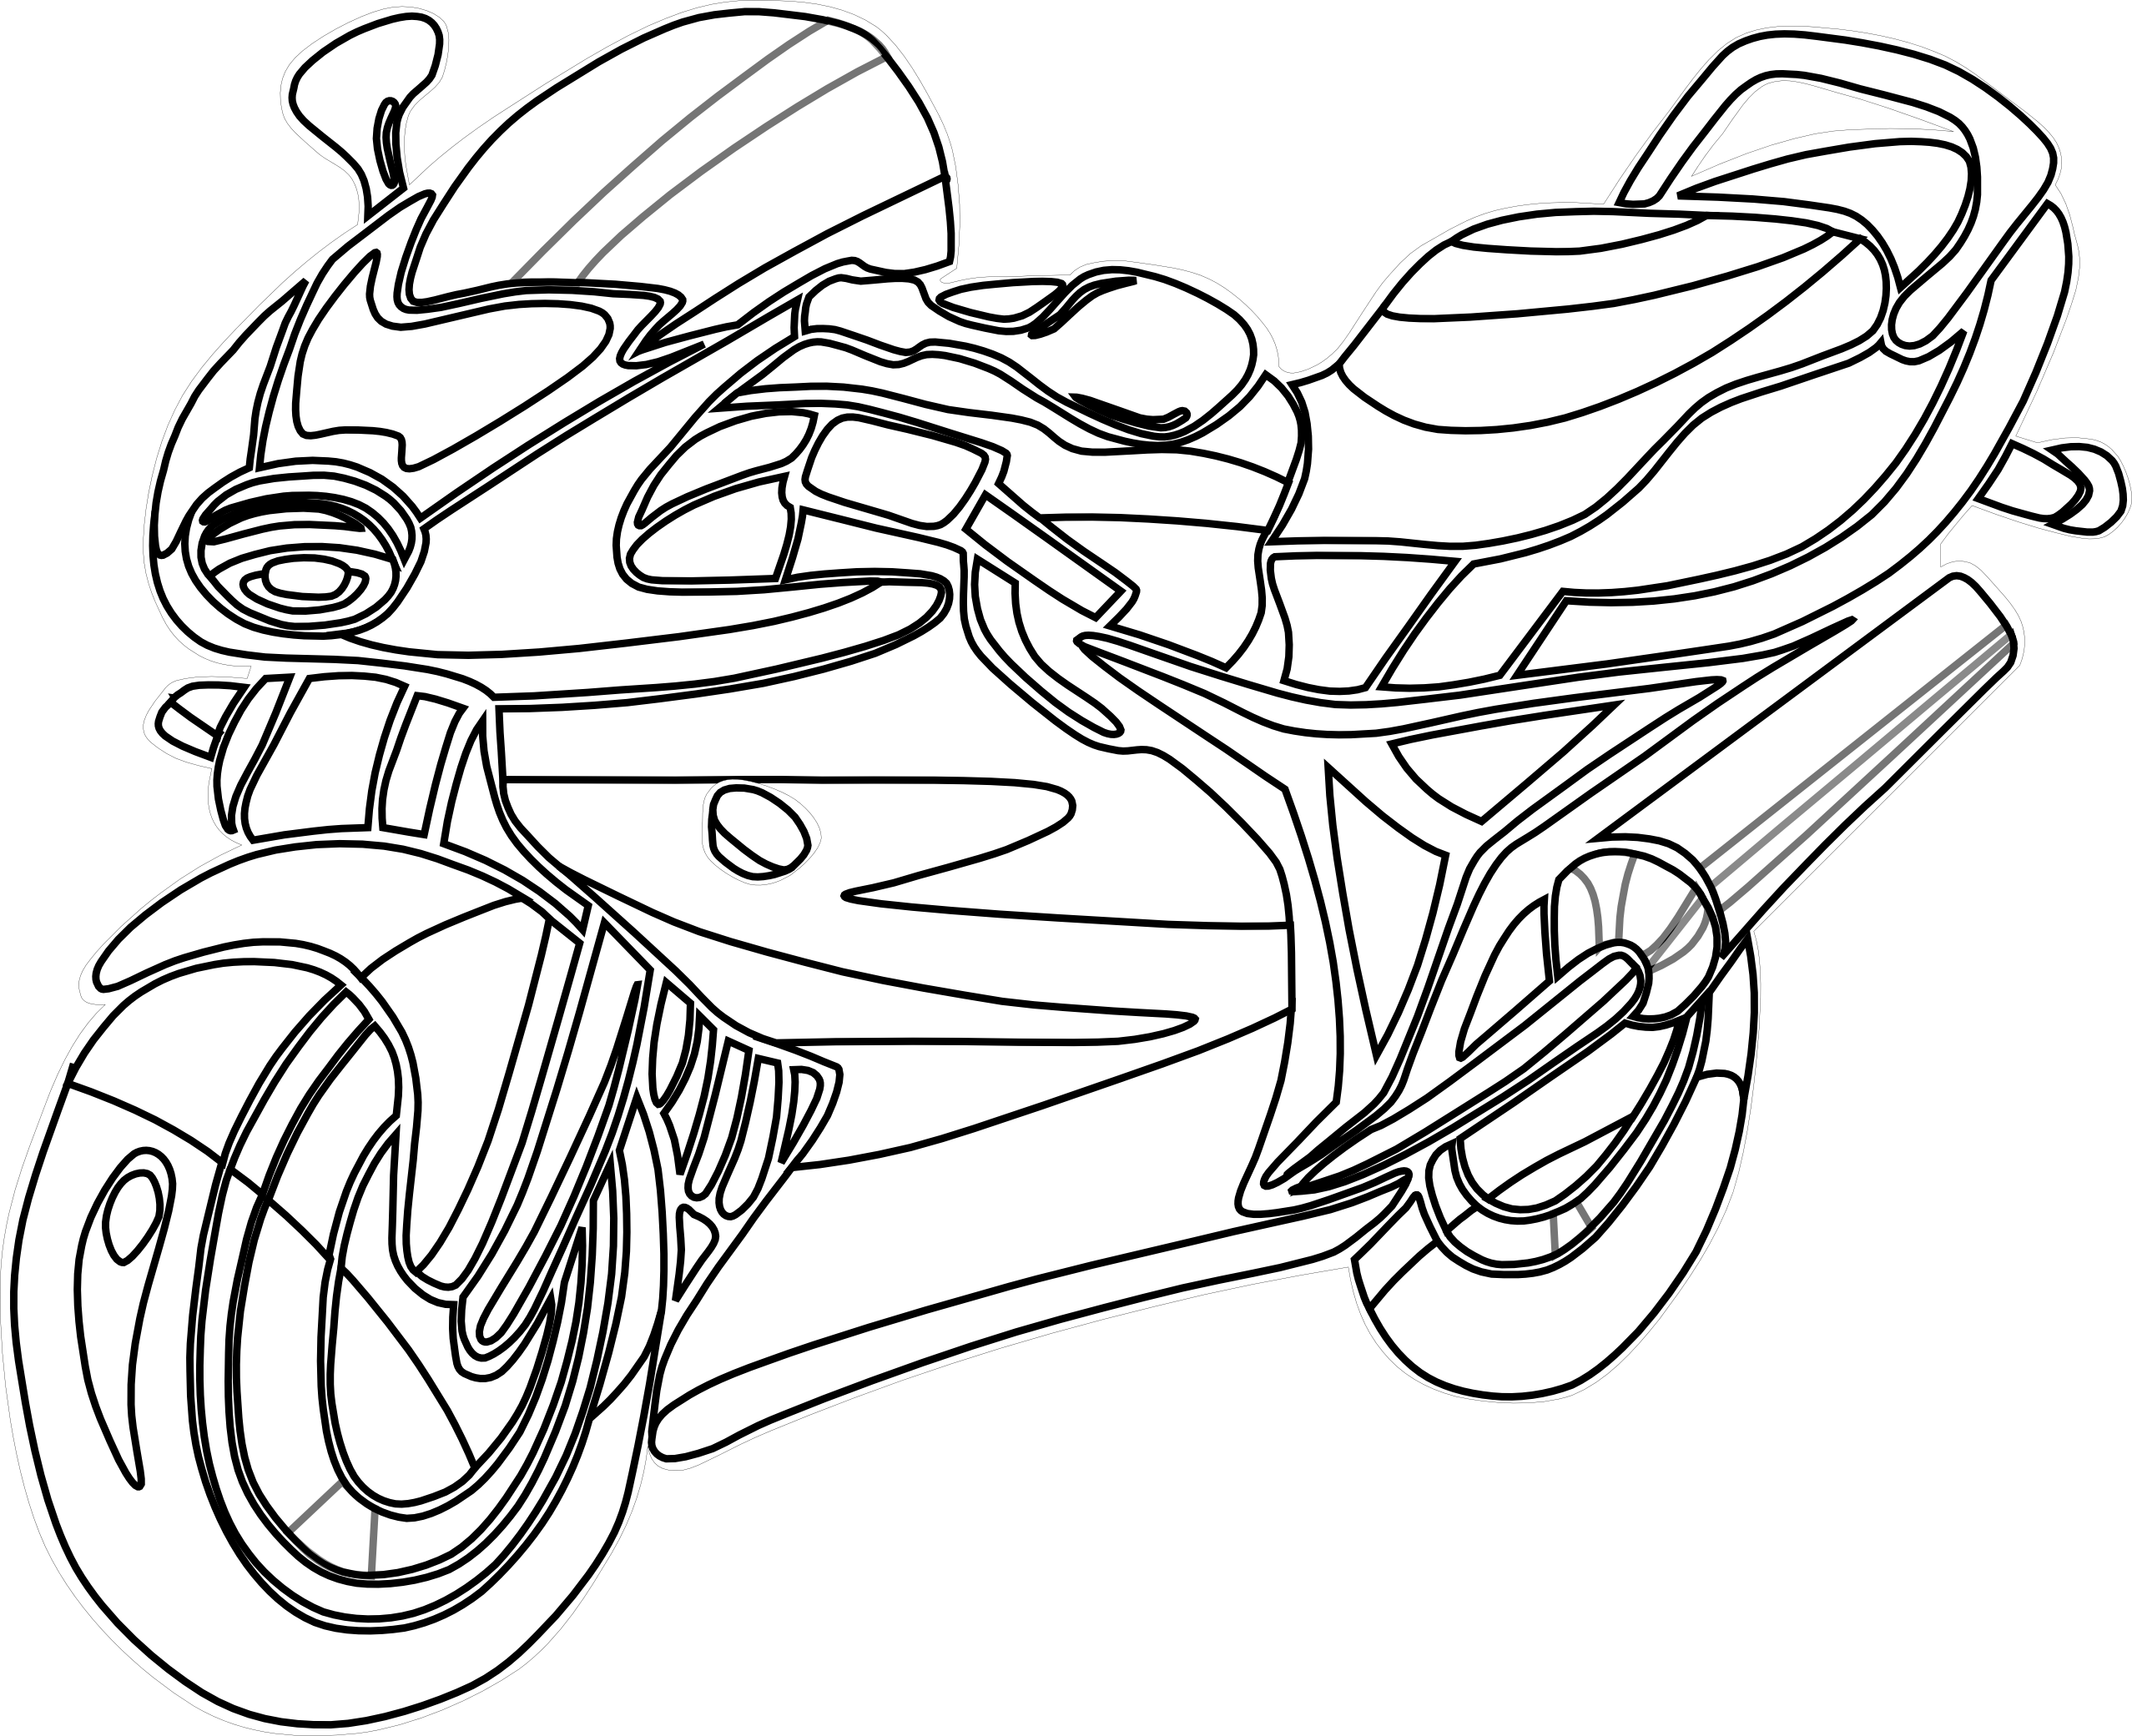 Vintage Motorcycle Clipart Black And White | Clipart Panda - Free ...